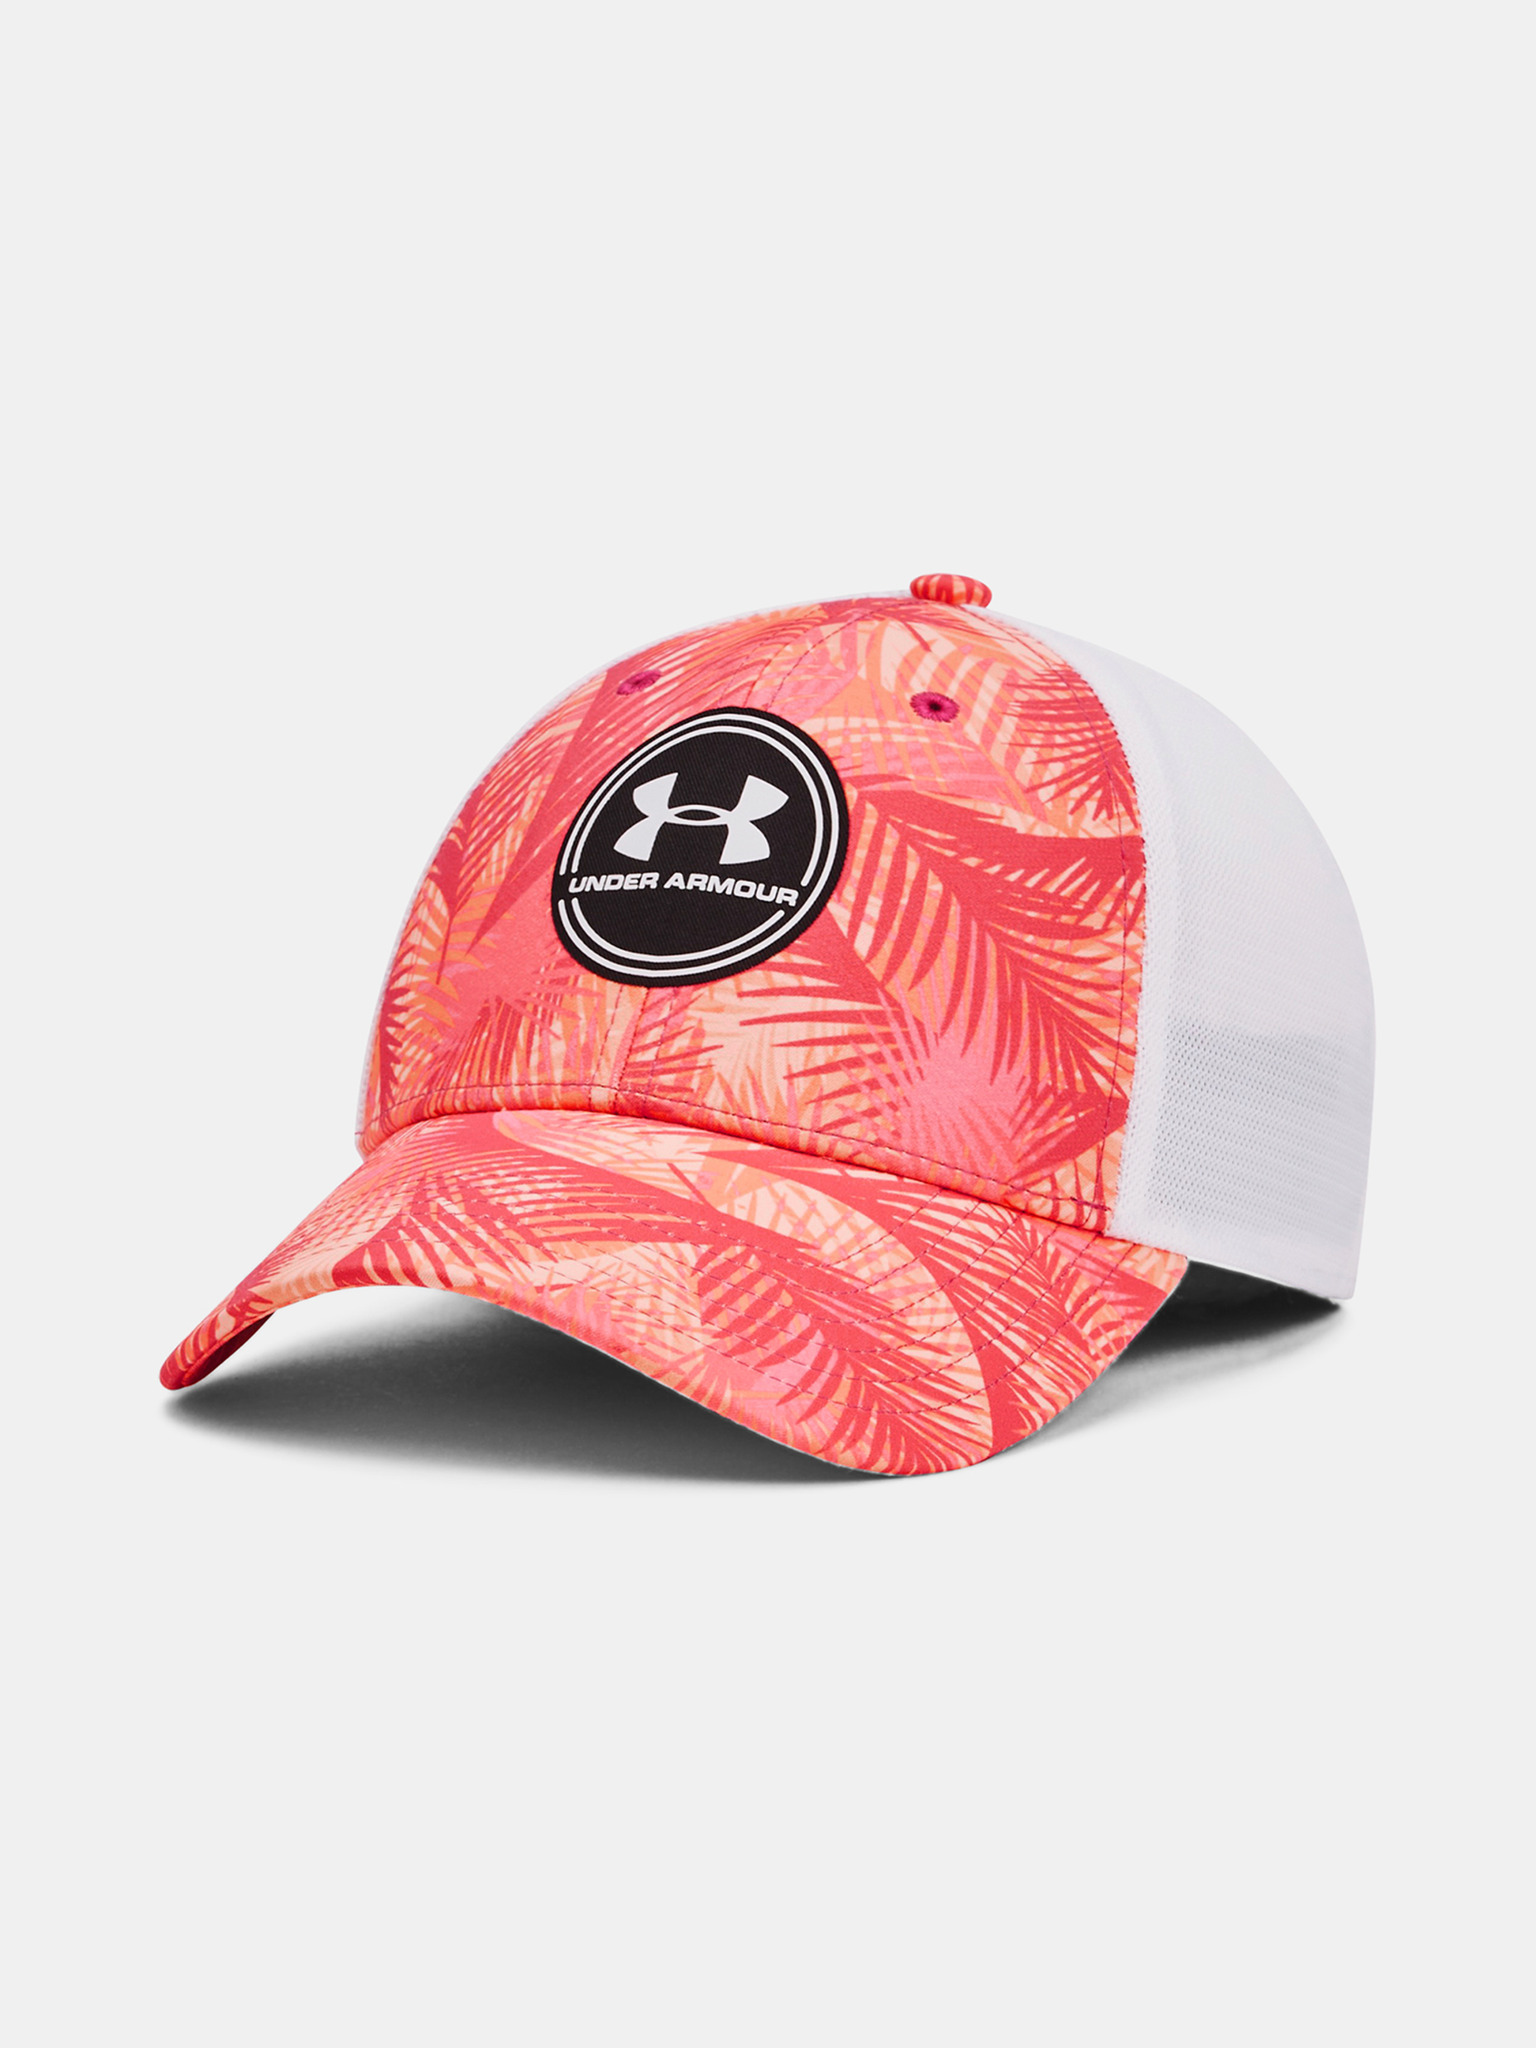 Under Armour Men's Hats Under Armour IsoChill Driver Golf Hat for